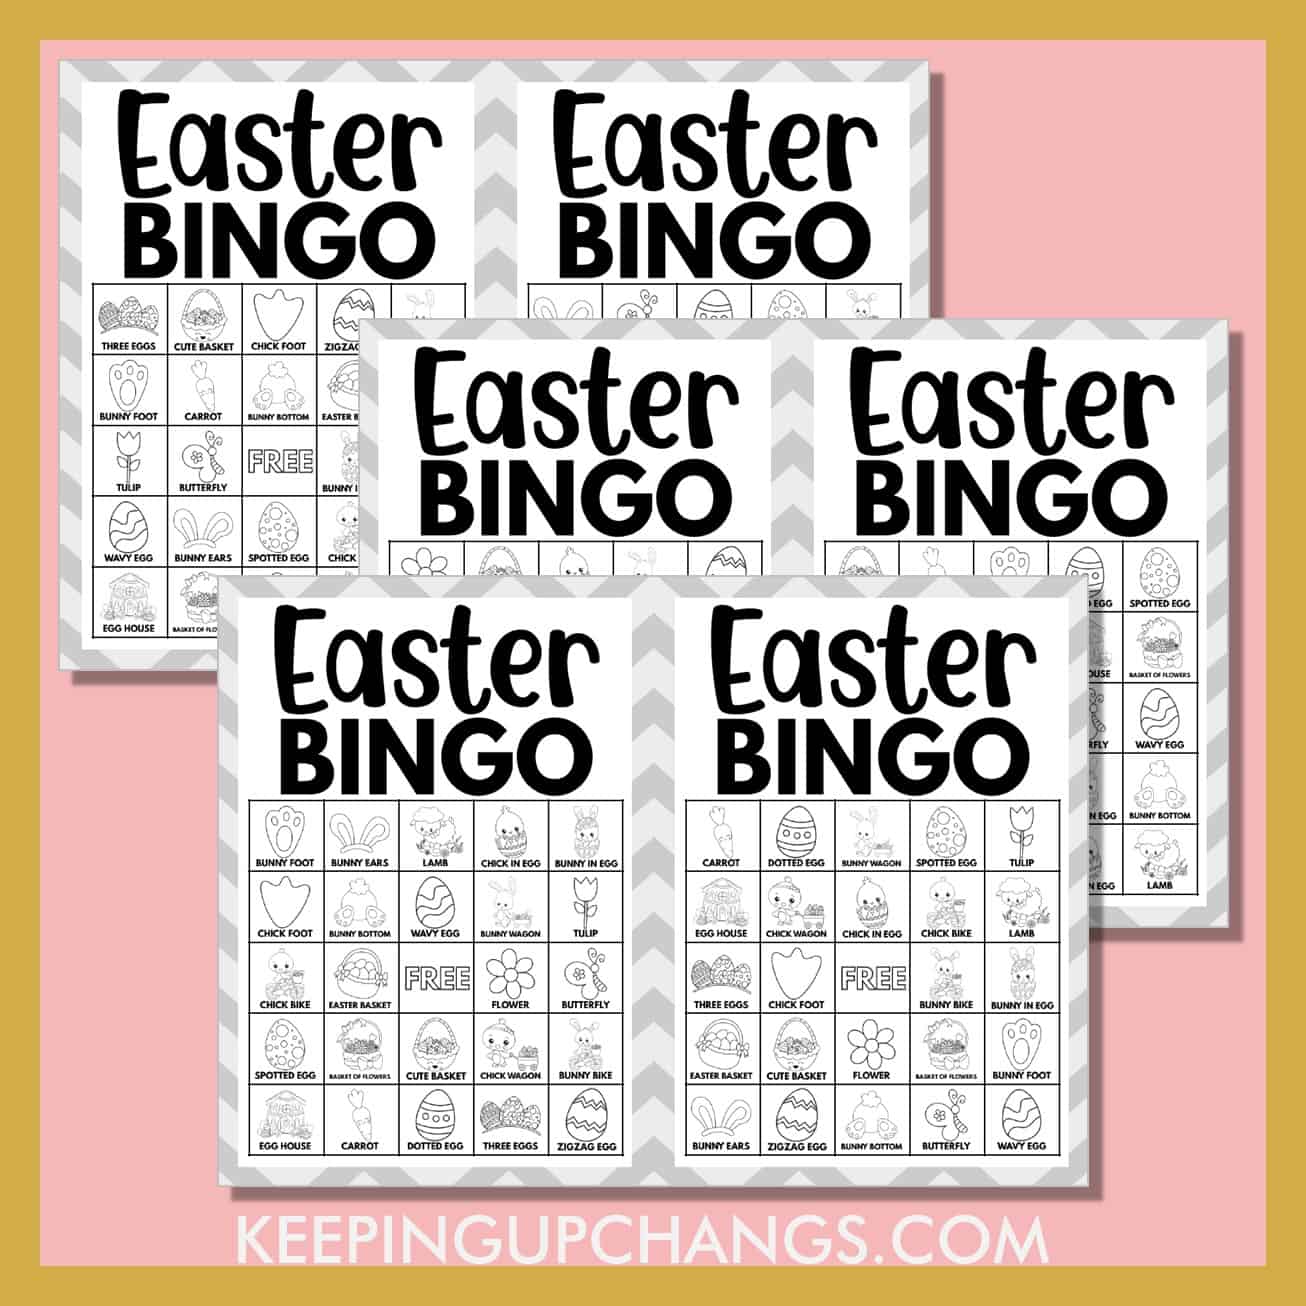 free easter bingo cards 5x5 black white coloring for party, school, group.